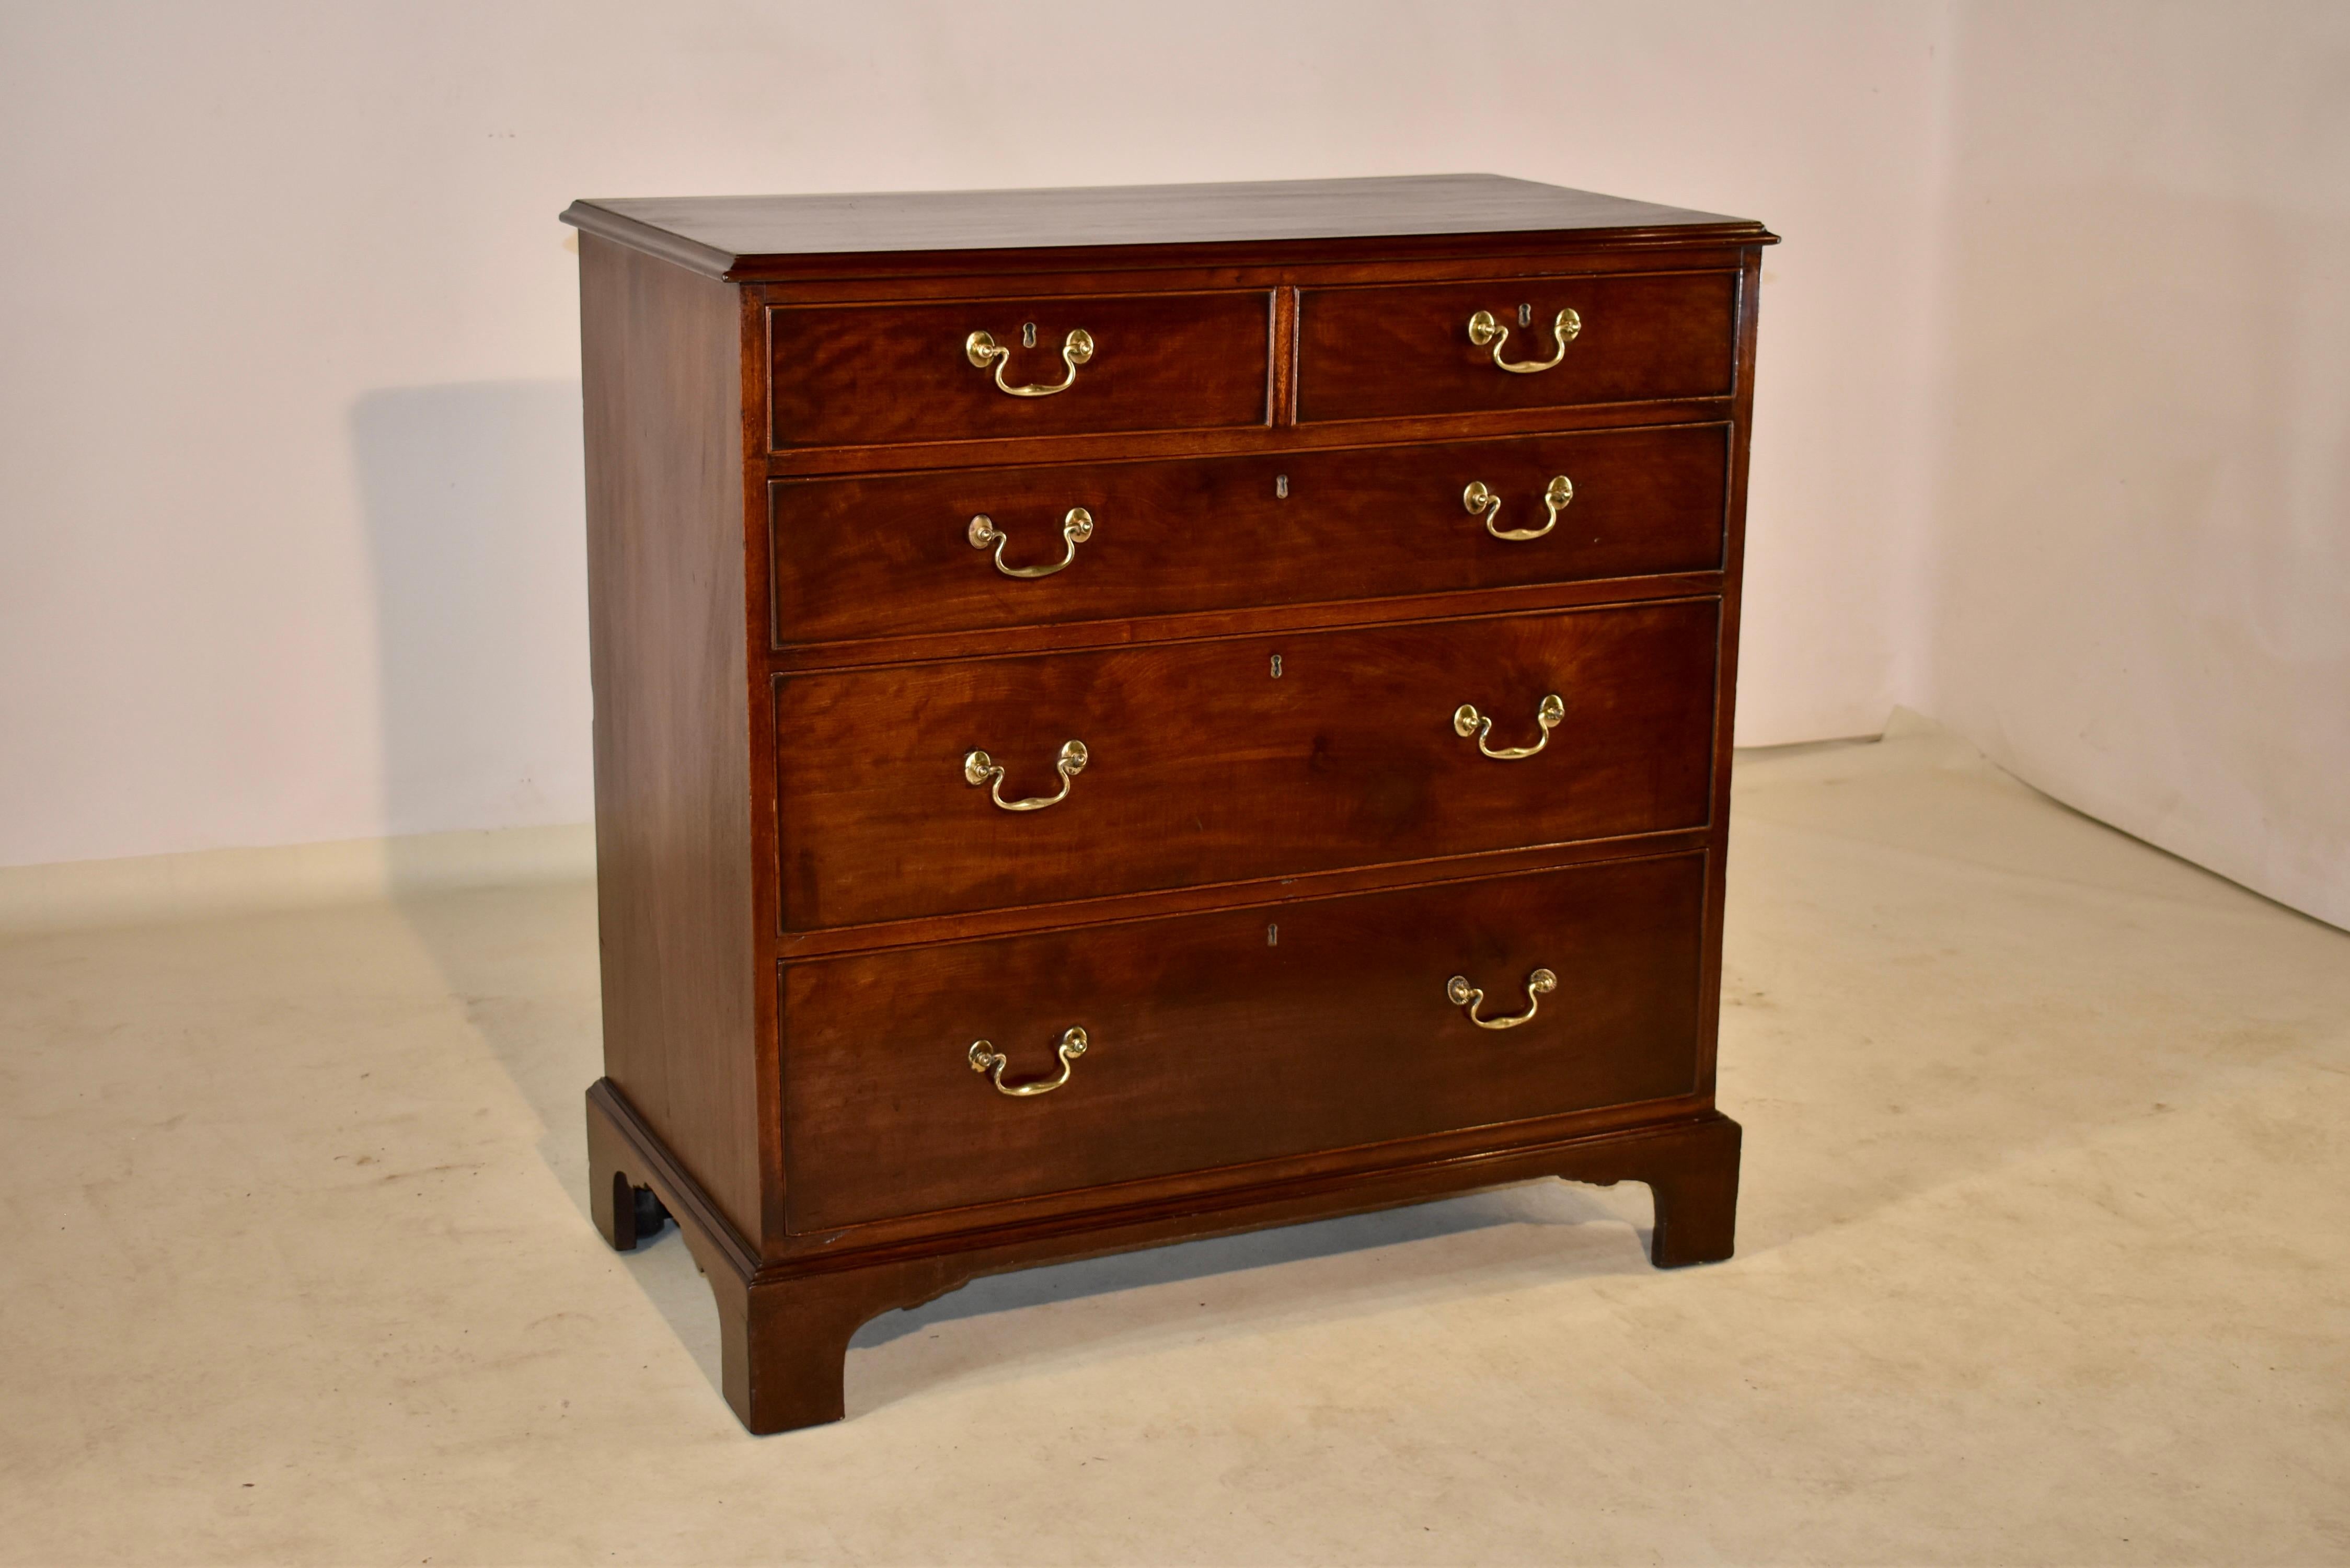 Late 18th-early 19th century period Georgian chest of drawers from England made from mahogany. The top is splendidly grained and follows down to sides which have lovely graining as well. The front of the case has two drawers over three drawers. The